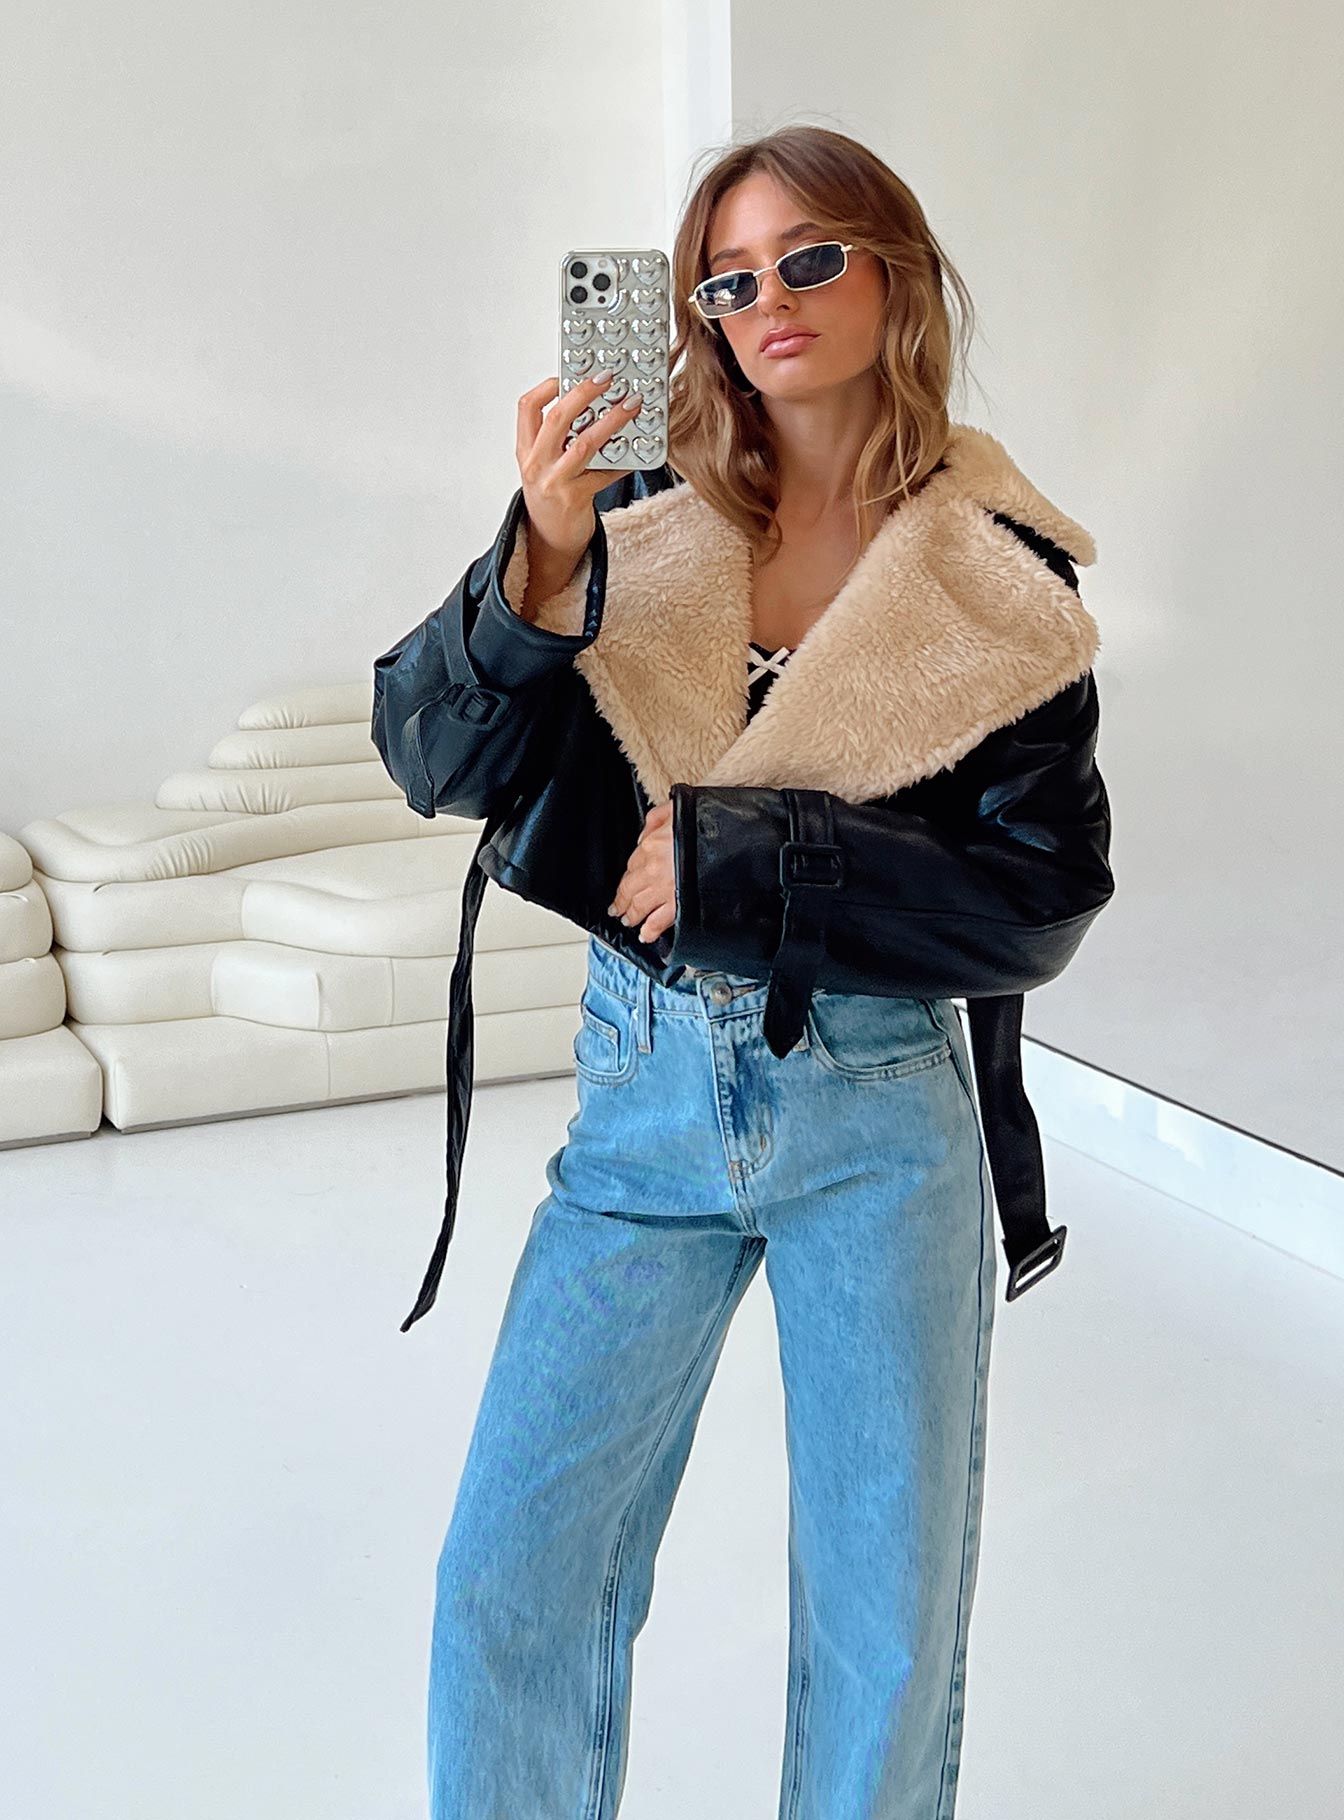 Need to buy *the* pair of jeans : r/IndianFashionAddicts